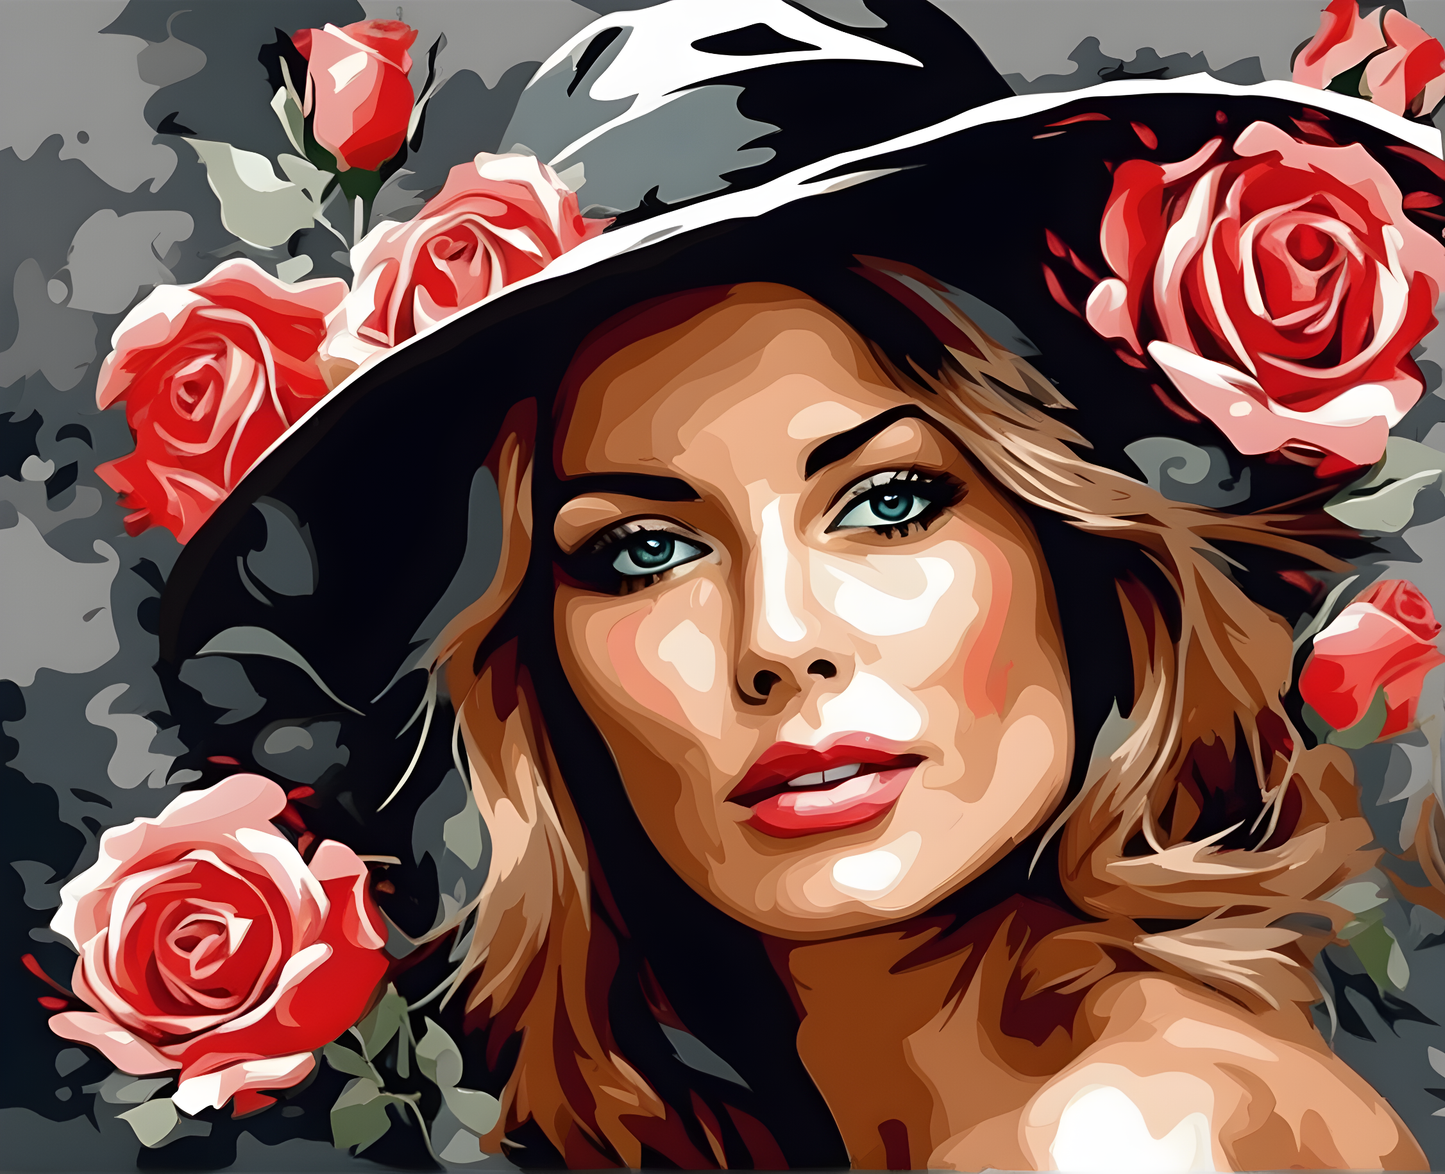 Roses Lady with a Black Hat (2) - Van-Go Paint-By-Number Kit